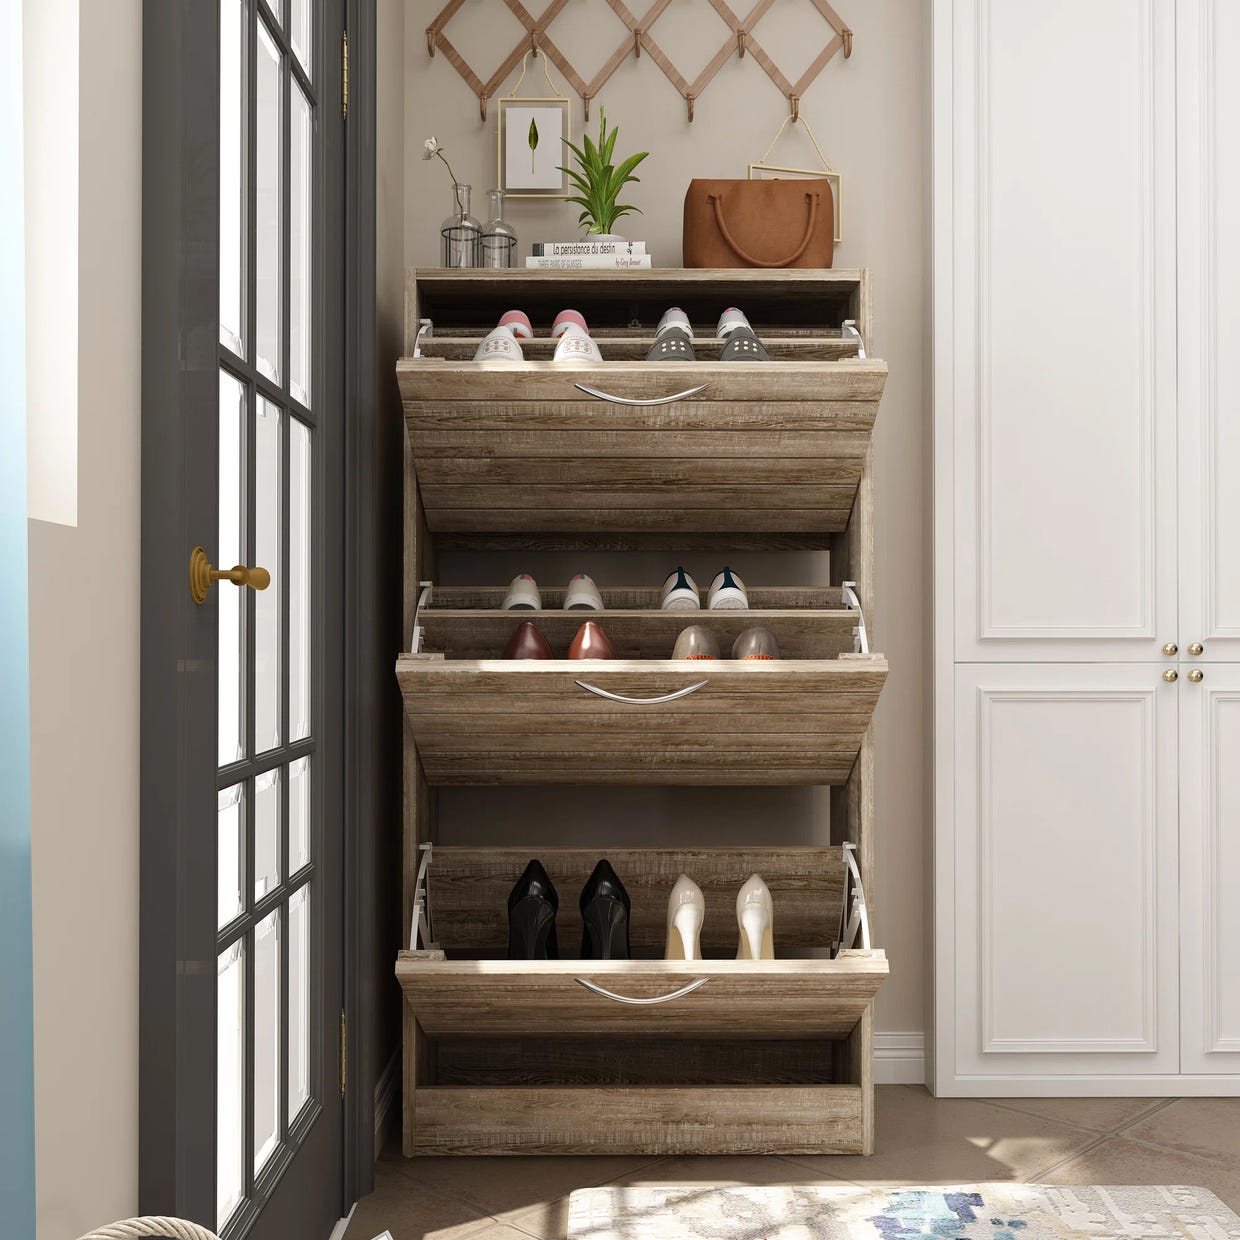 Wooden shoe storage cabinet with pull-out drawers, displaying various pairs of shoes inside.